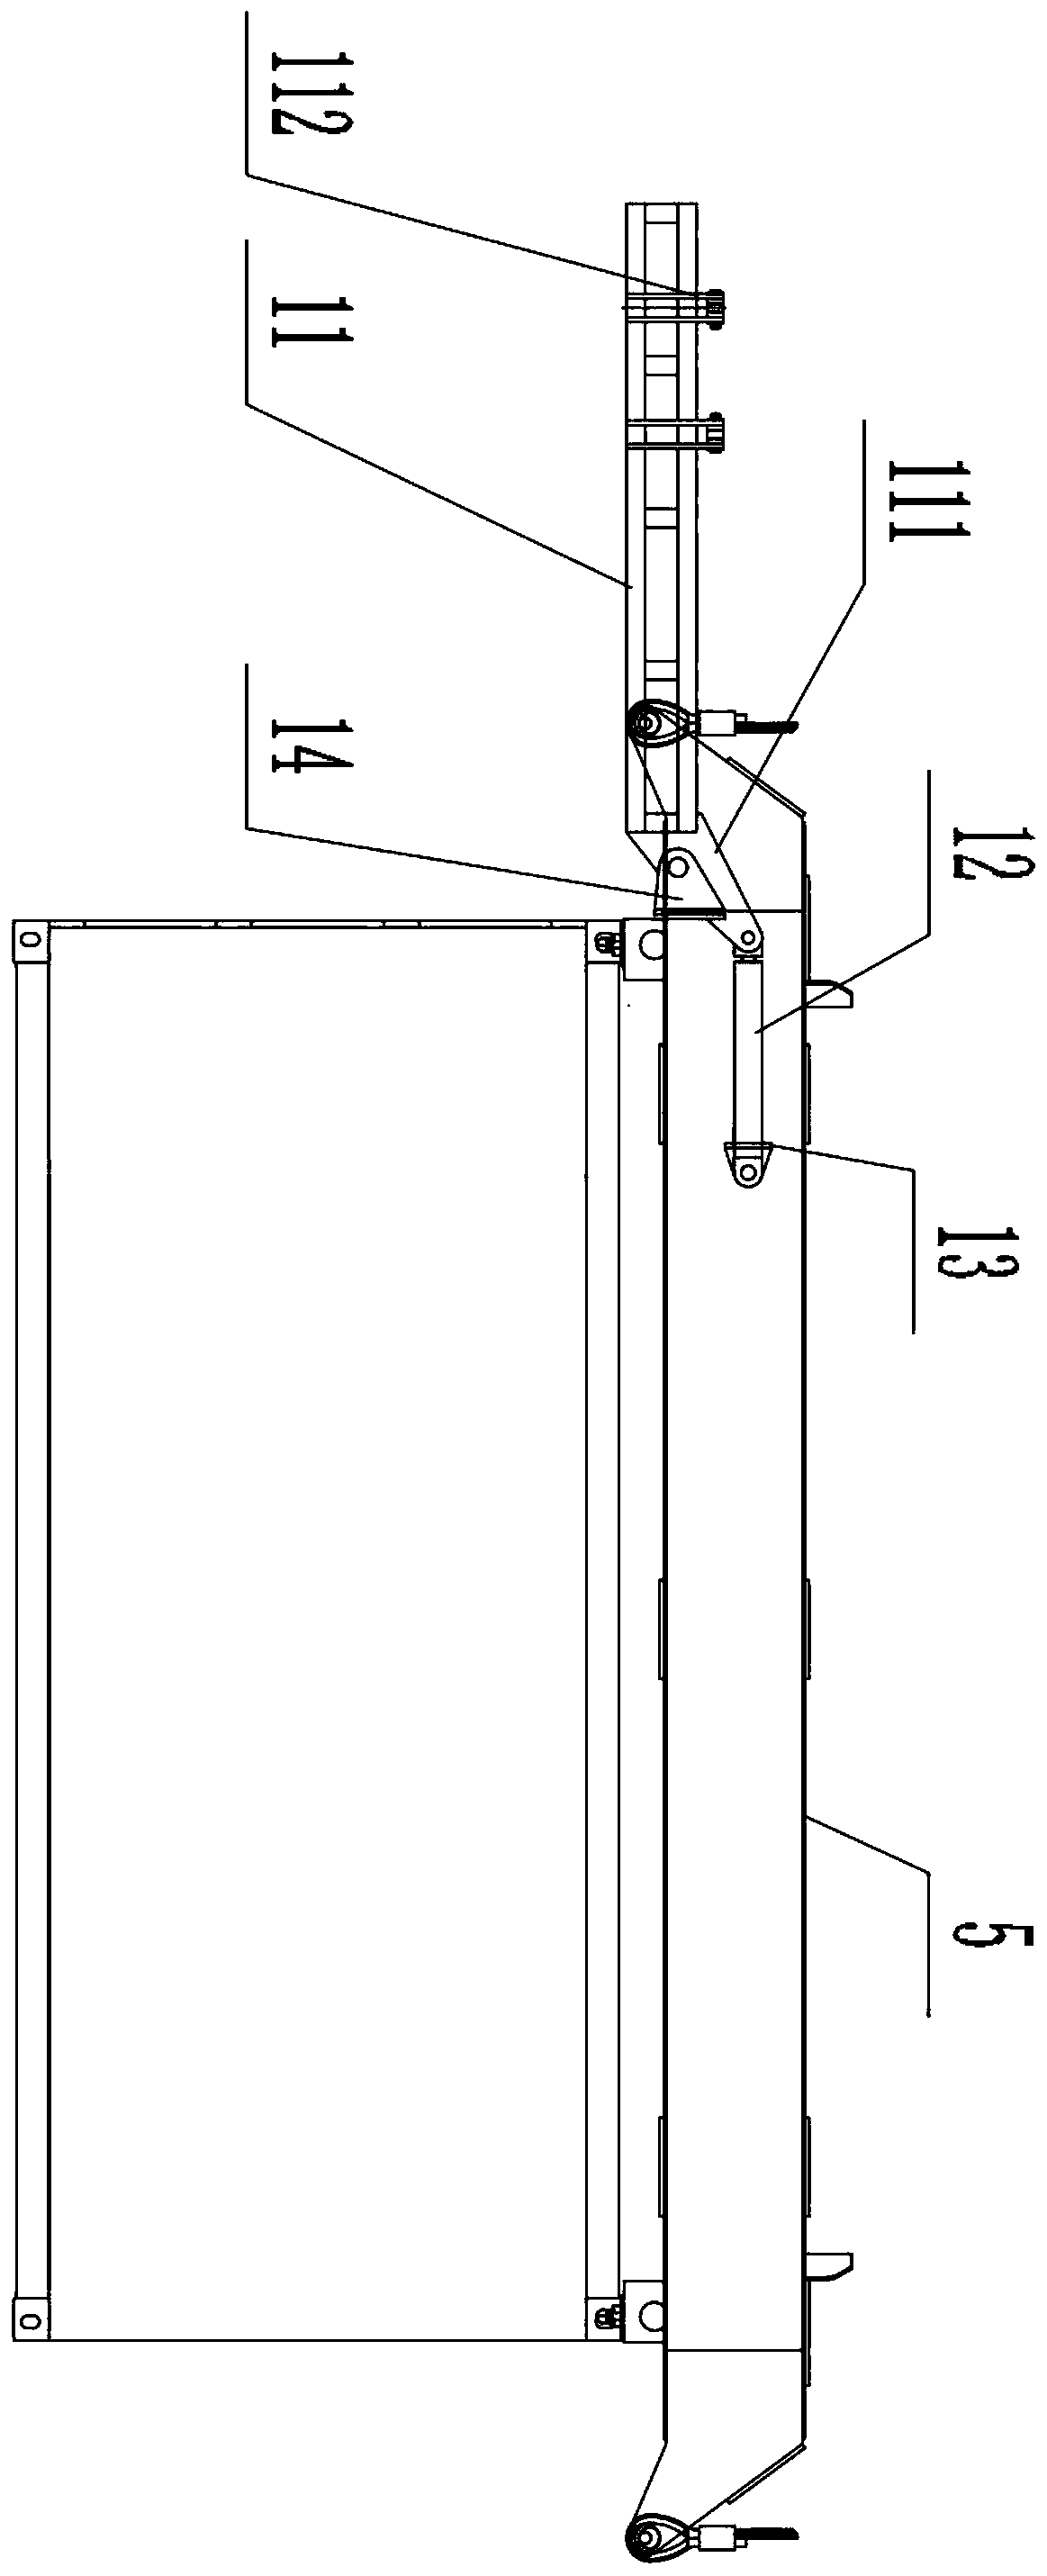 Container door opening or closing device of container